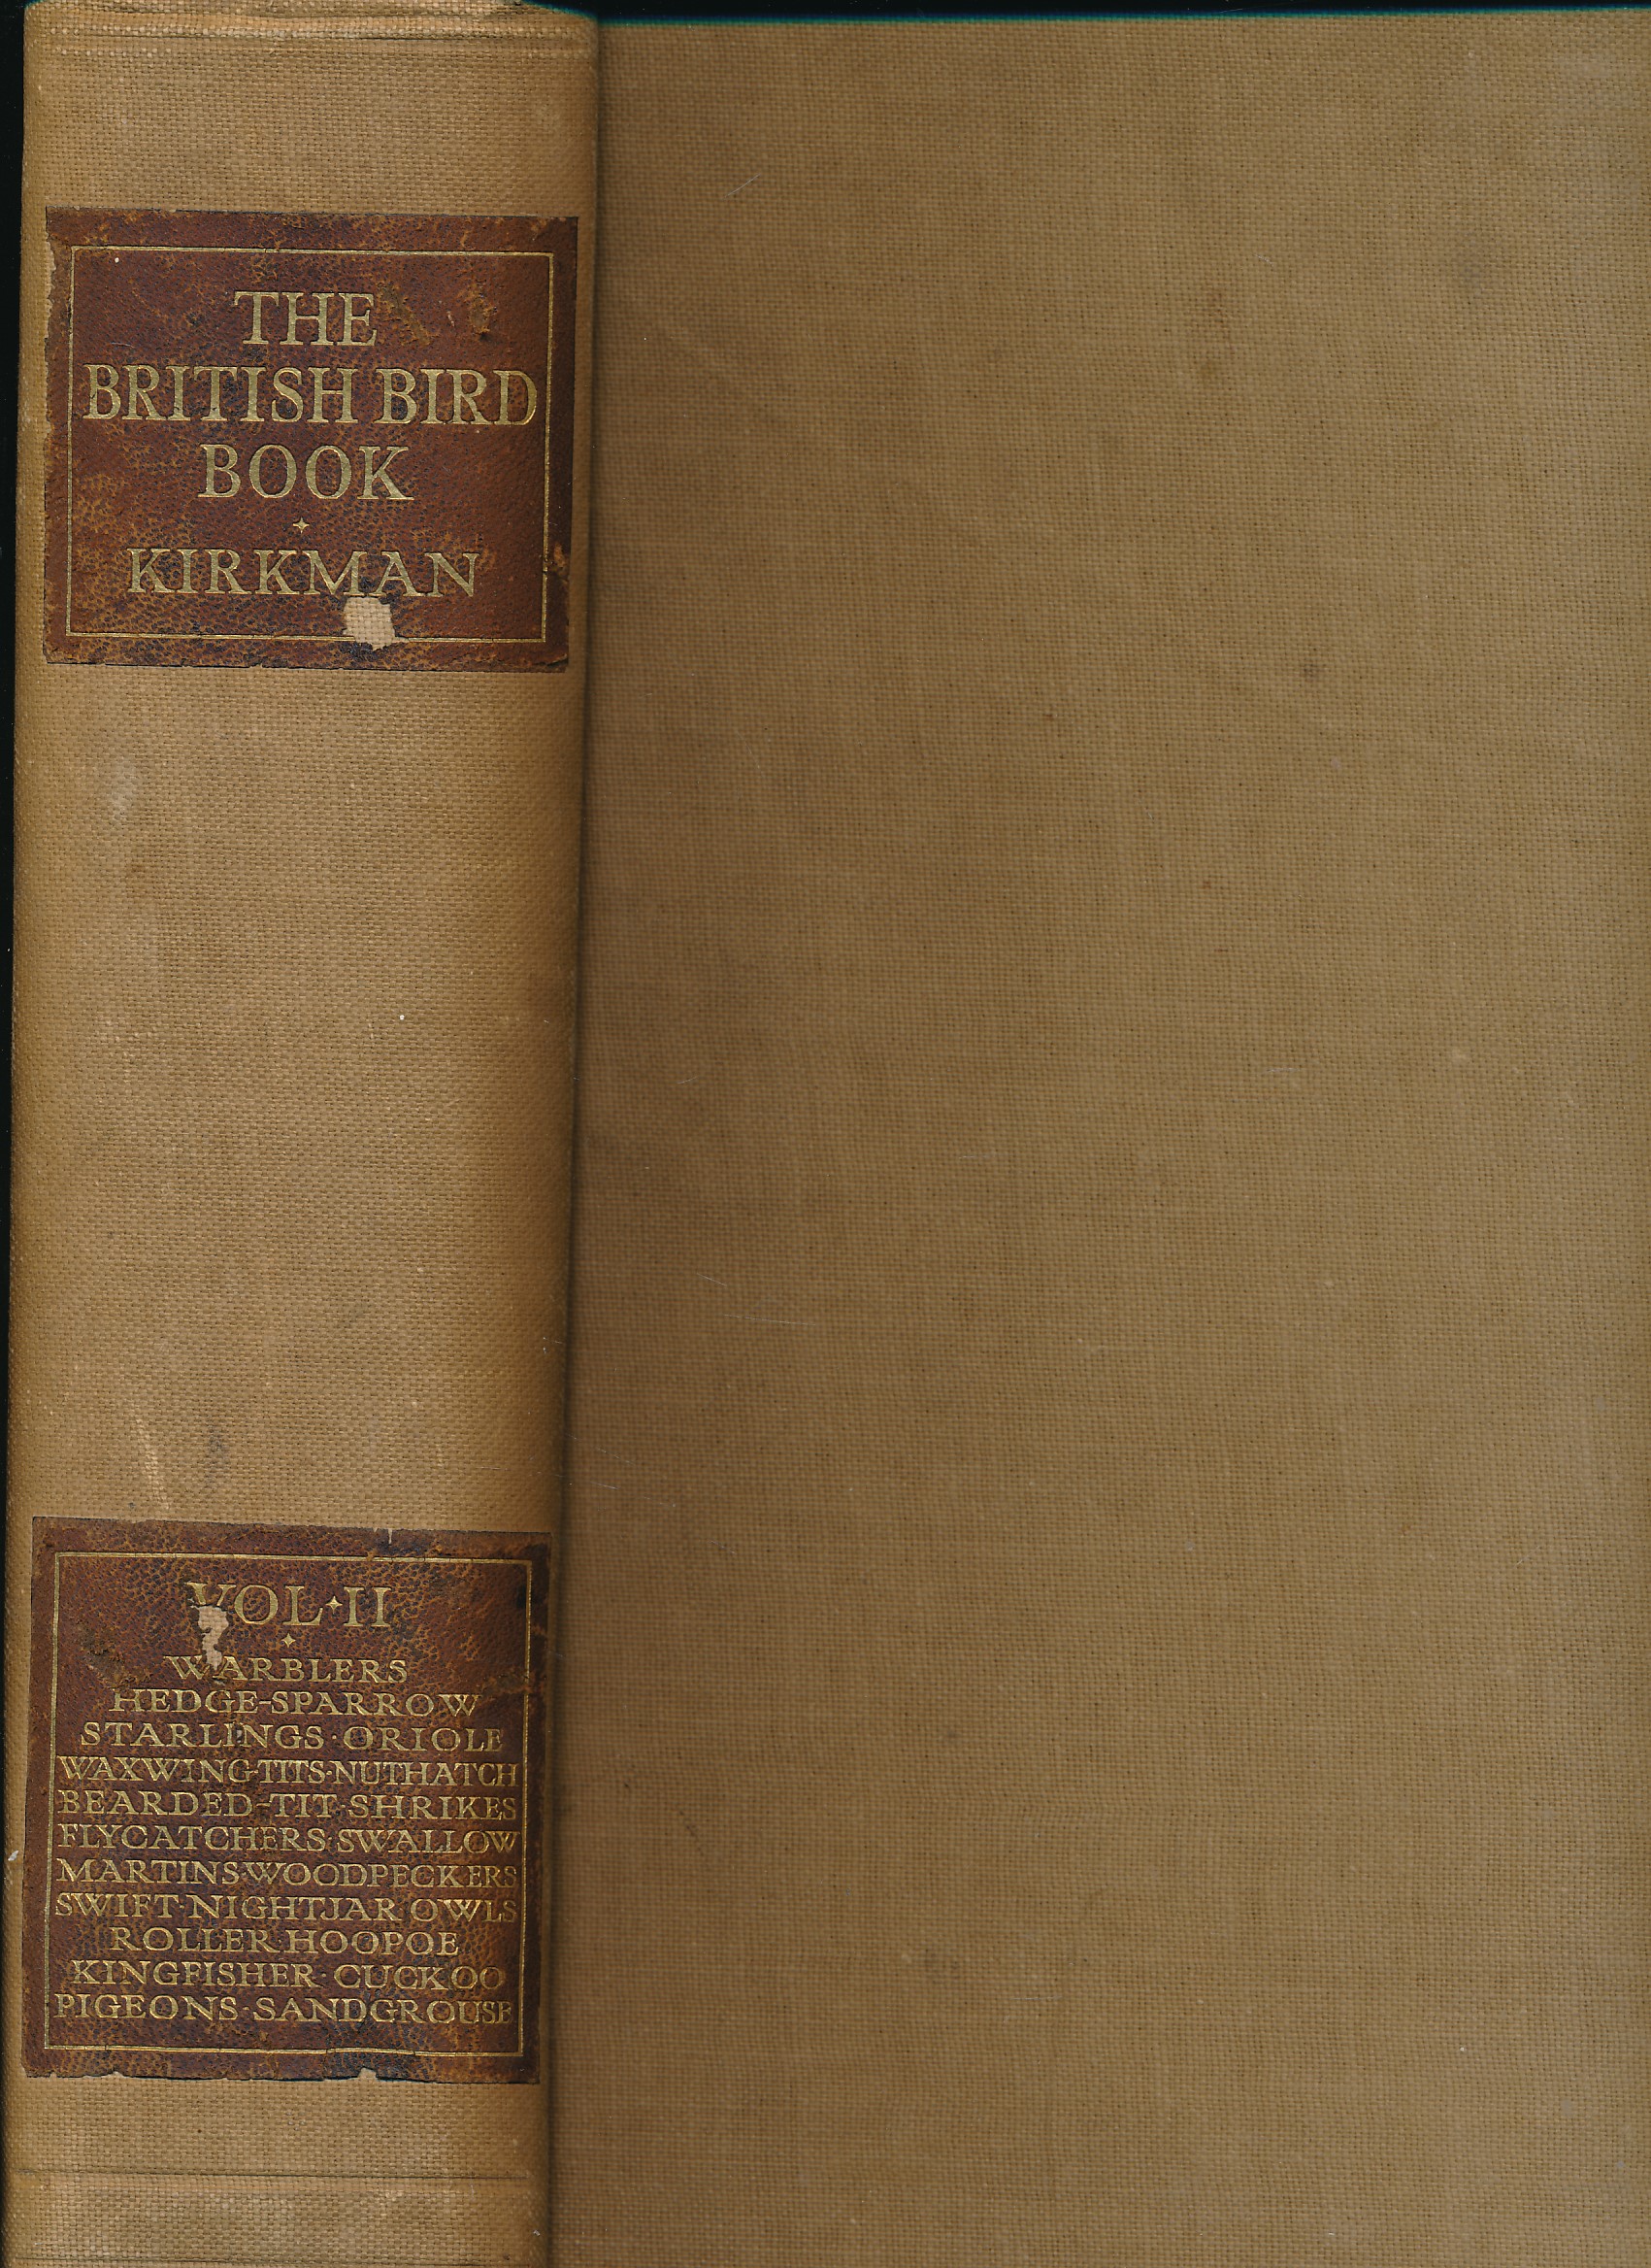 The British Bird Book. An Account of All the Birds, Nests and Eggs Found in the British Isles. 4 volume set.